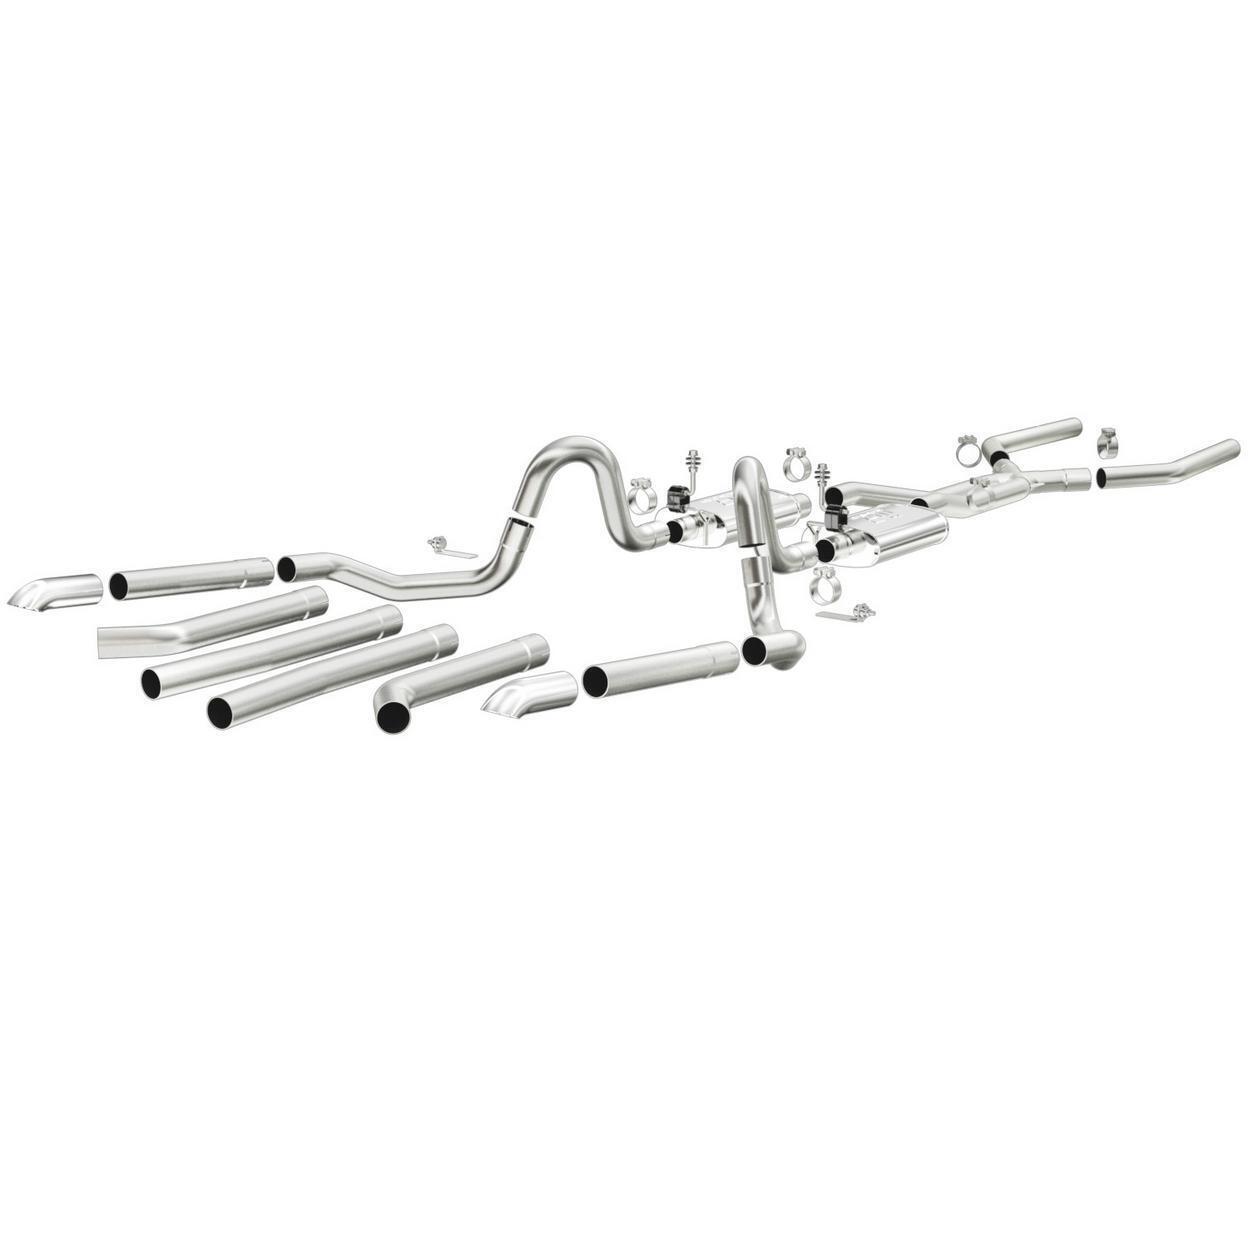 Exhaust System Kit for 1968-1969 Buick GS 400